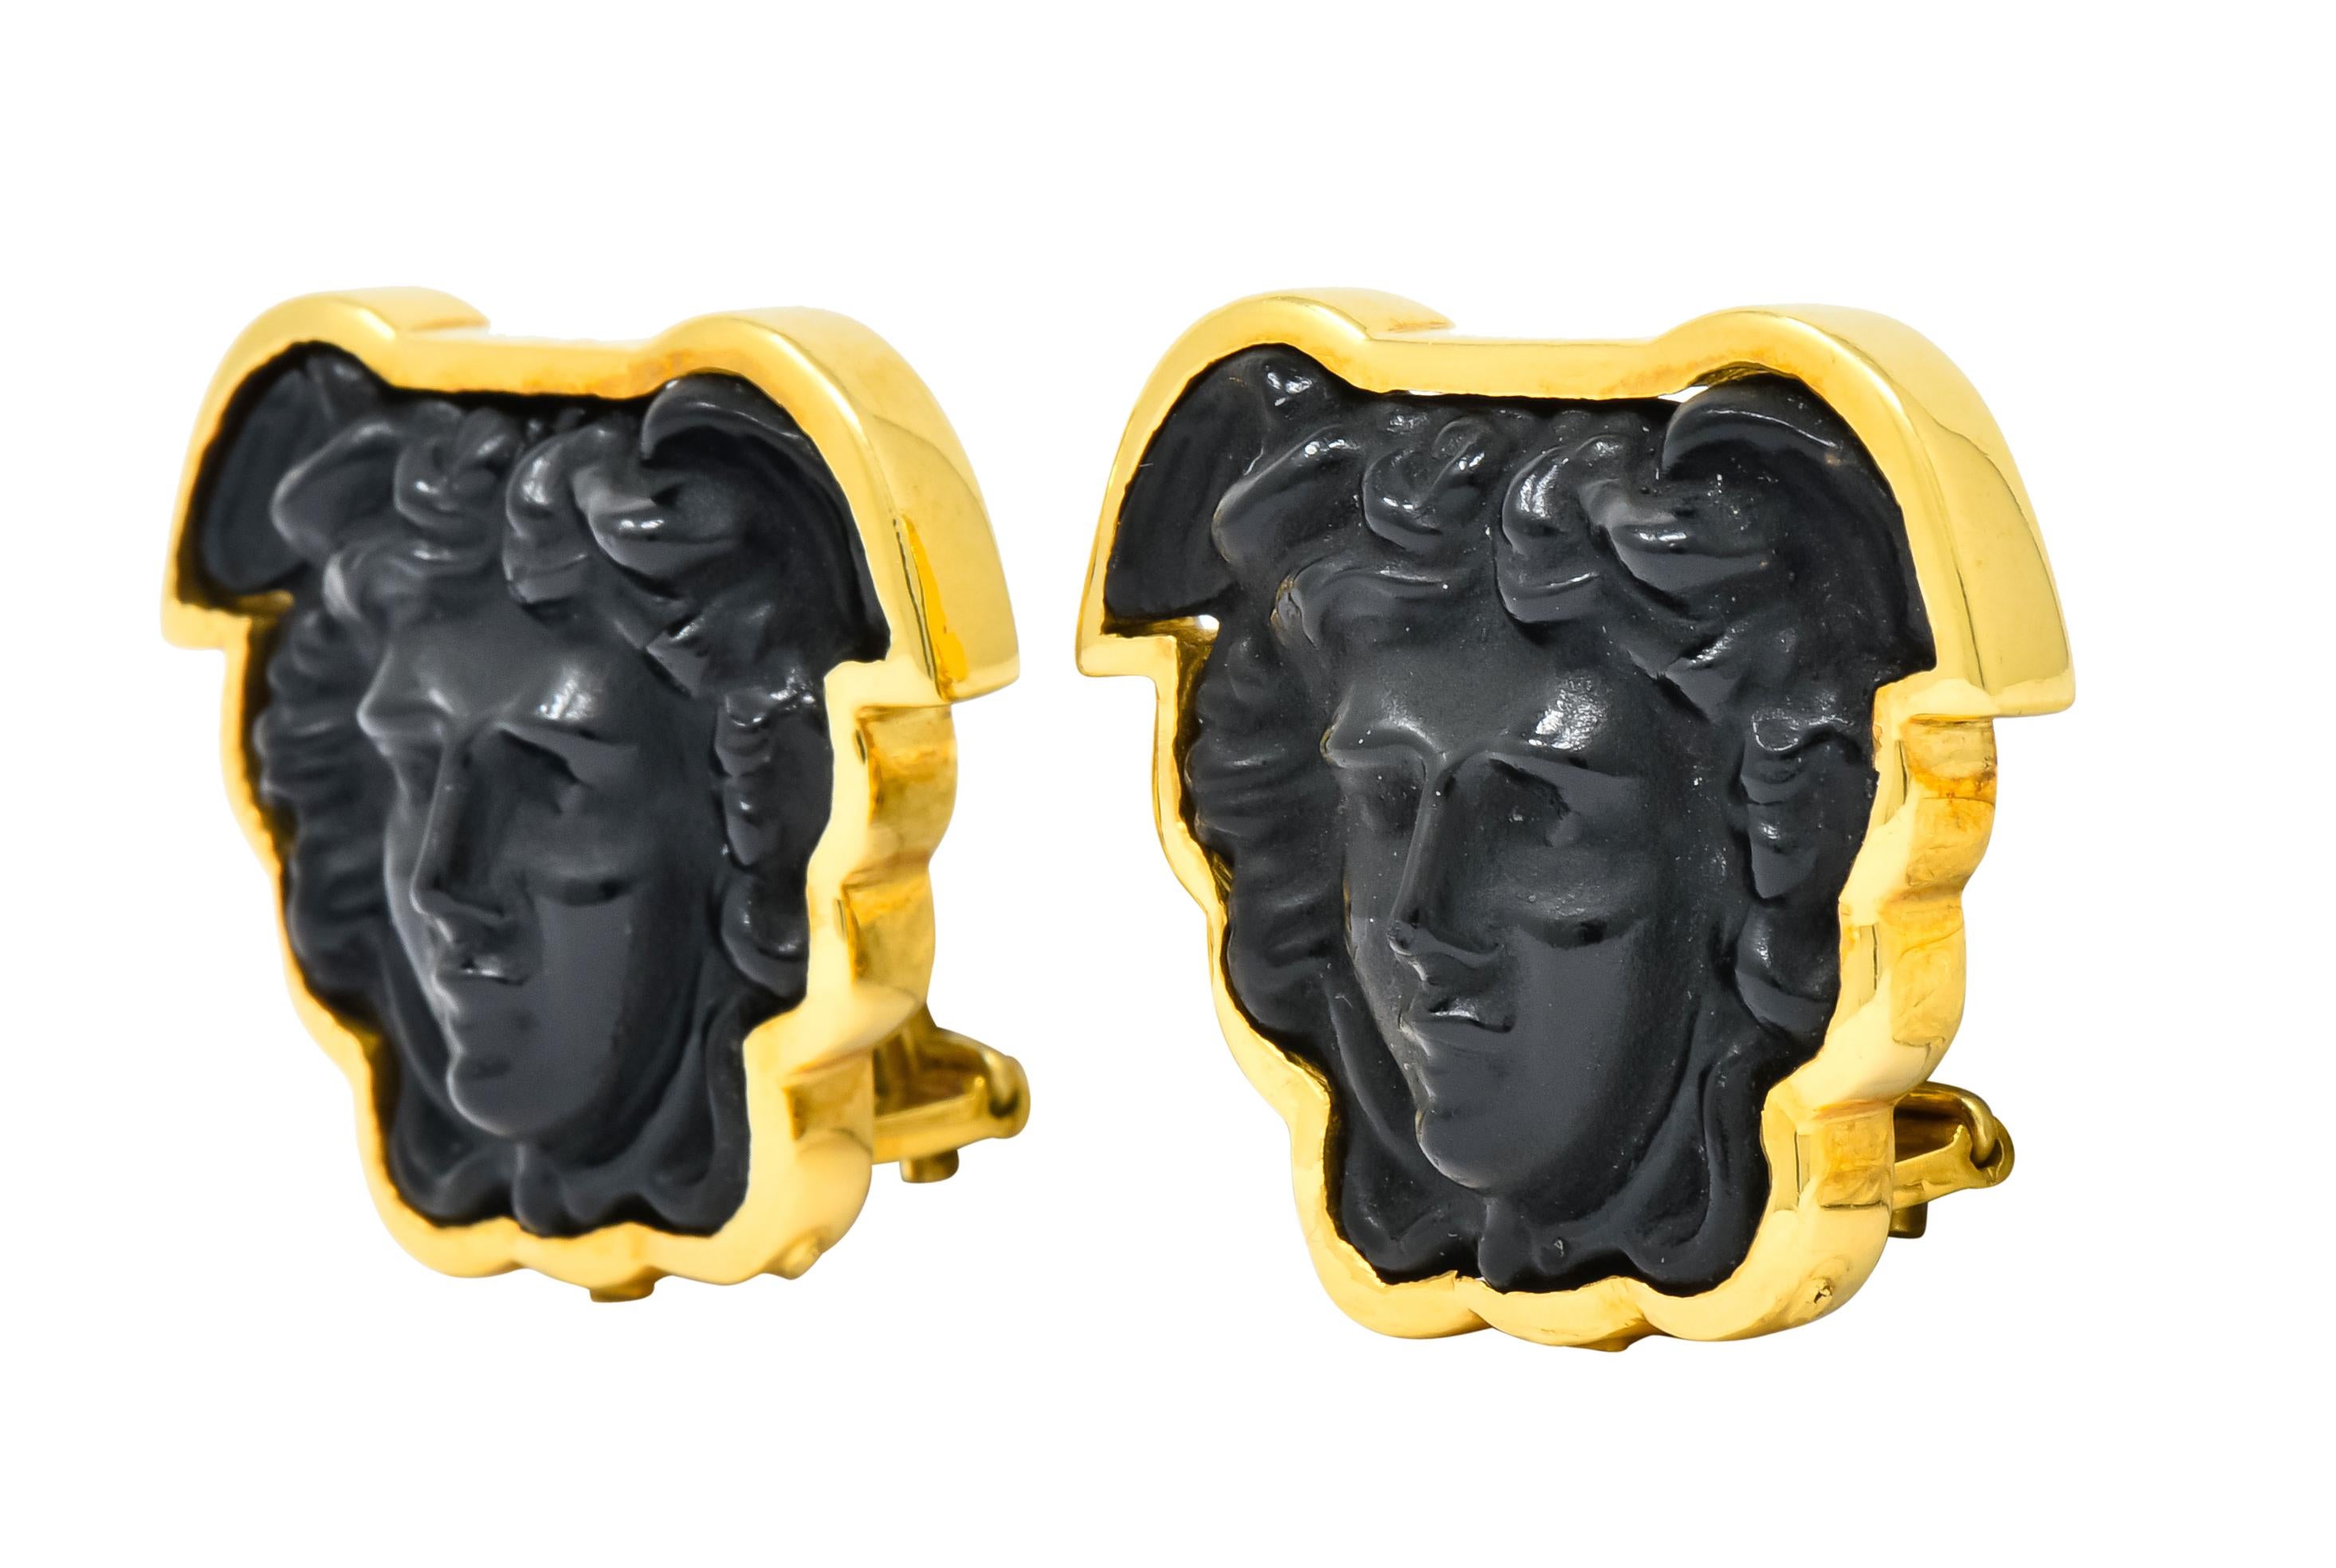 Each earring centers carved onyx depicting a detailed rendering of Medusa

Bezel set in a polished gold surround

Completed by hinged omega backs with optional posts

With maker's mark for Elizabeth Locke and stamped 18k for 18 karat gold

Measures: